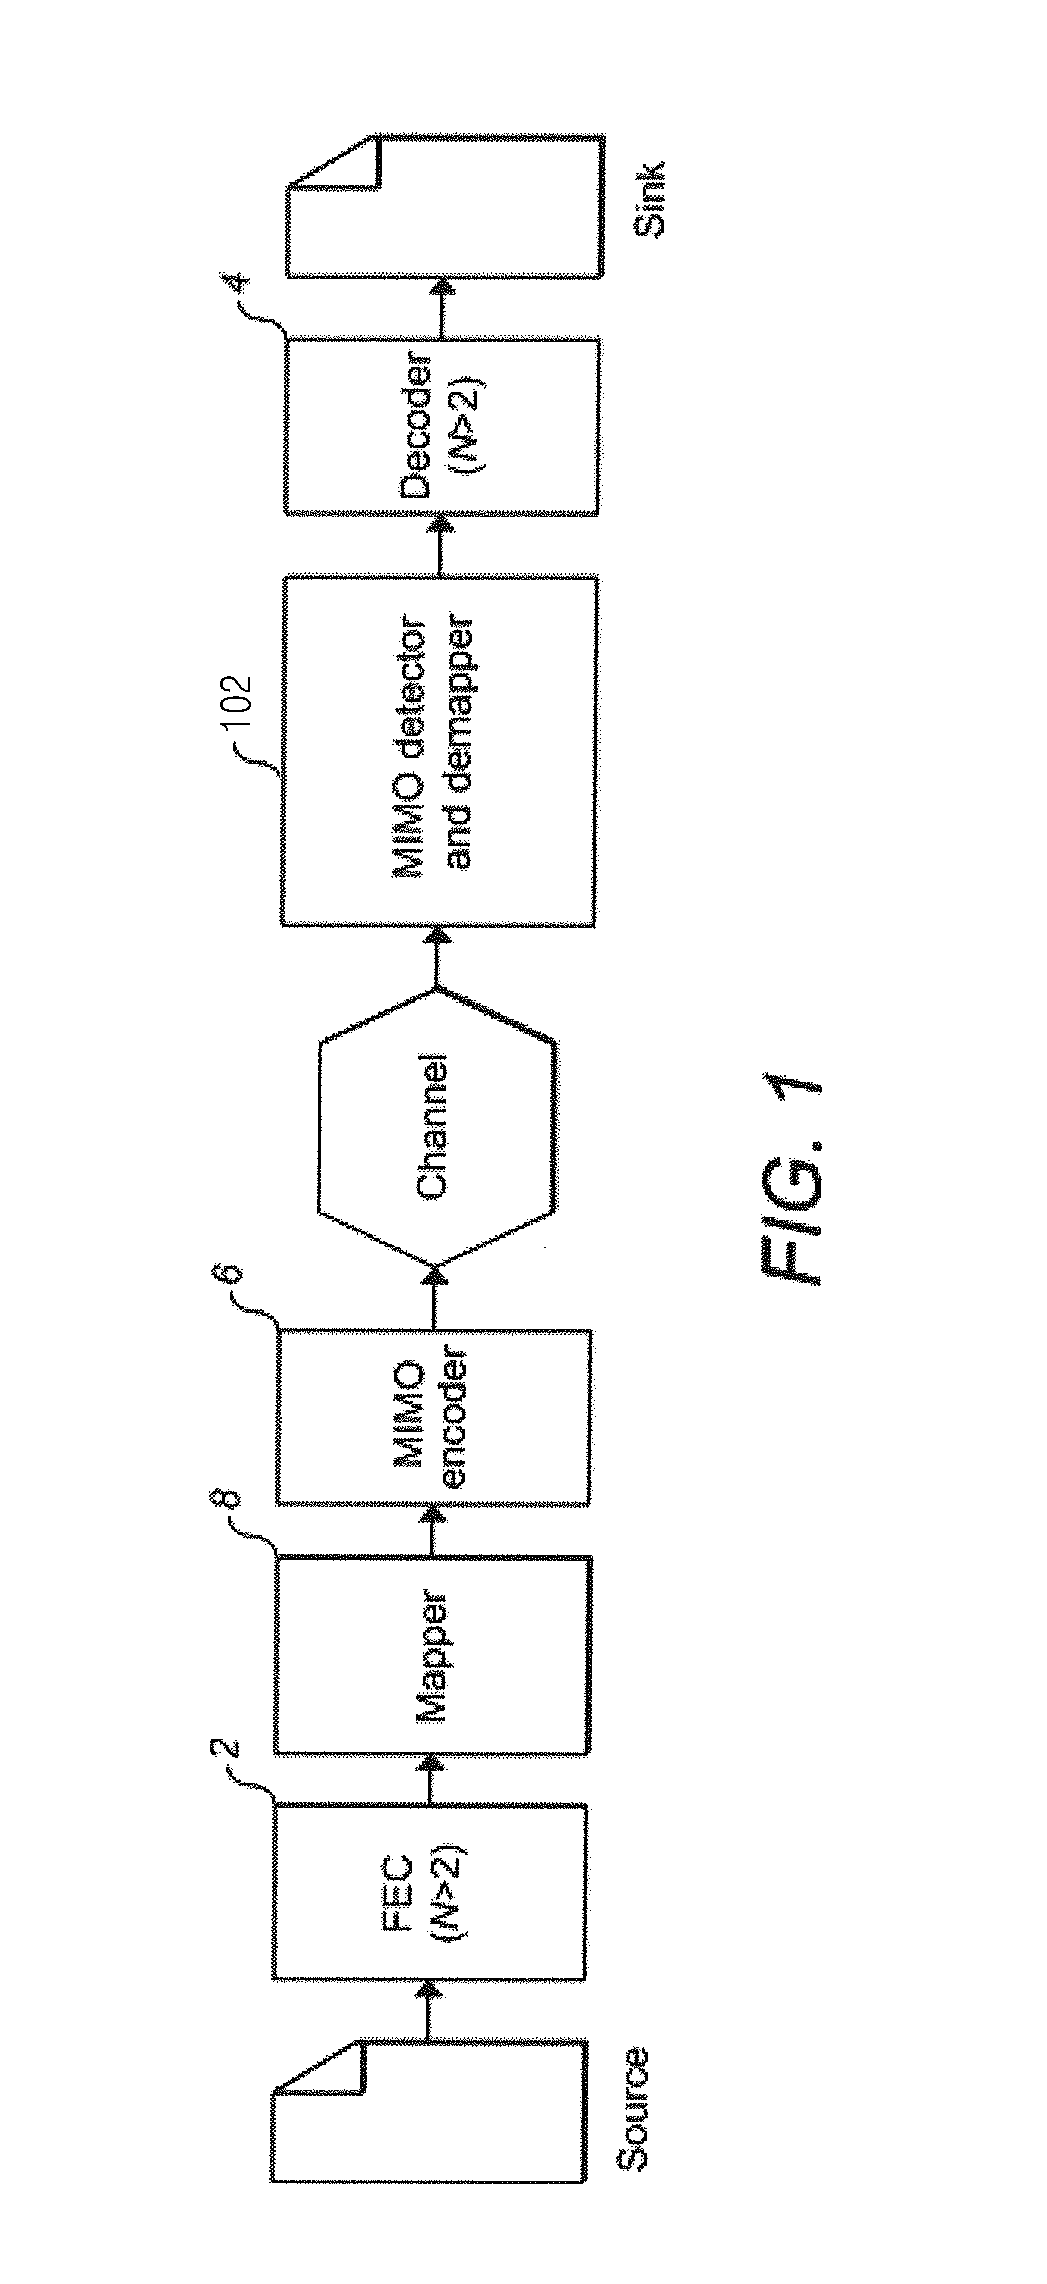 Method for mapping and de-mapping of non-binary symbols in data communication systems